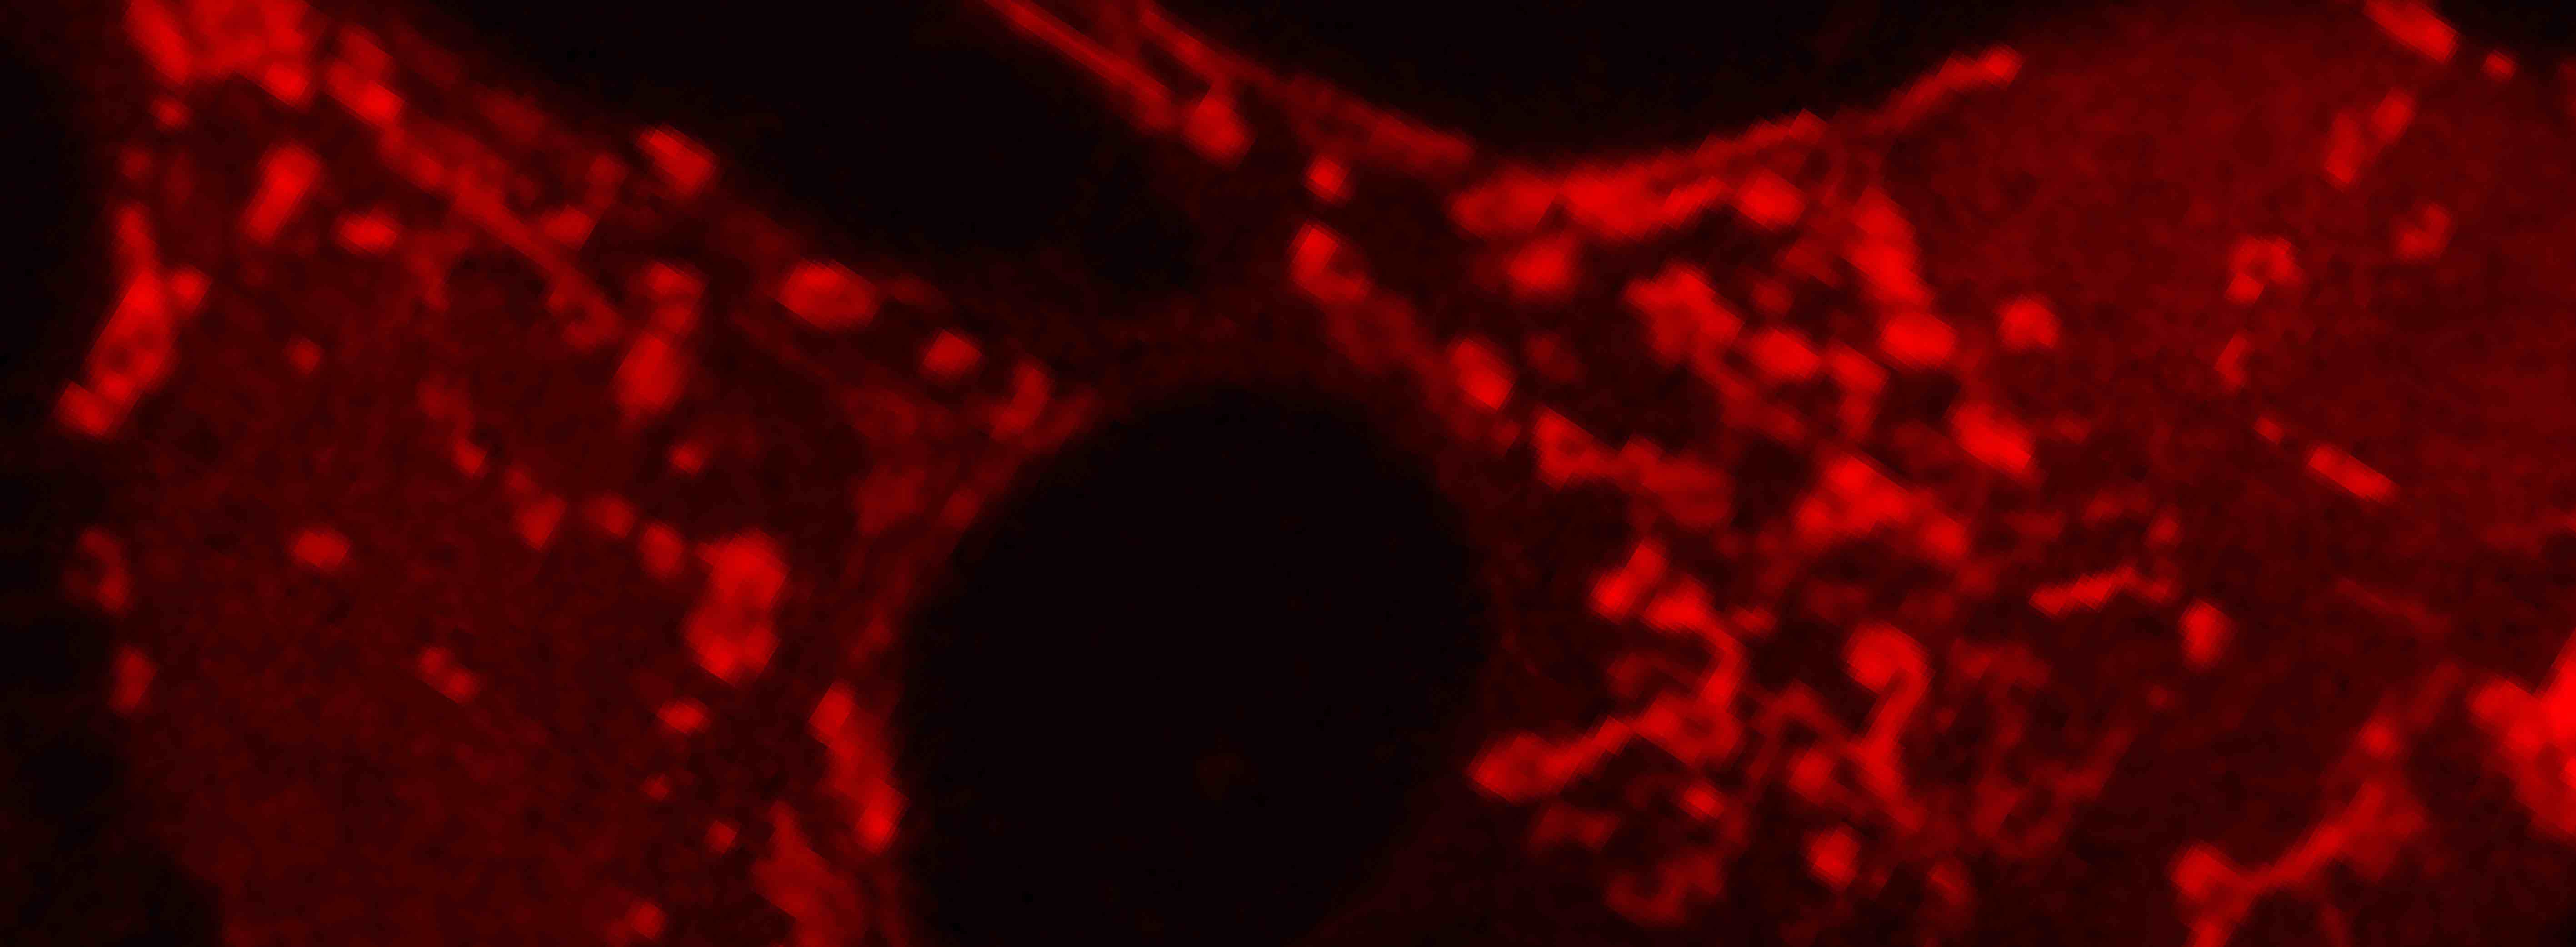 Squirrel brain cells with glowing red fluorescent mitochondria